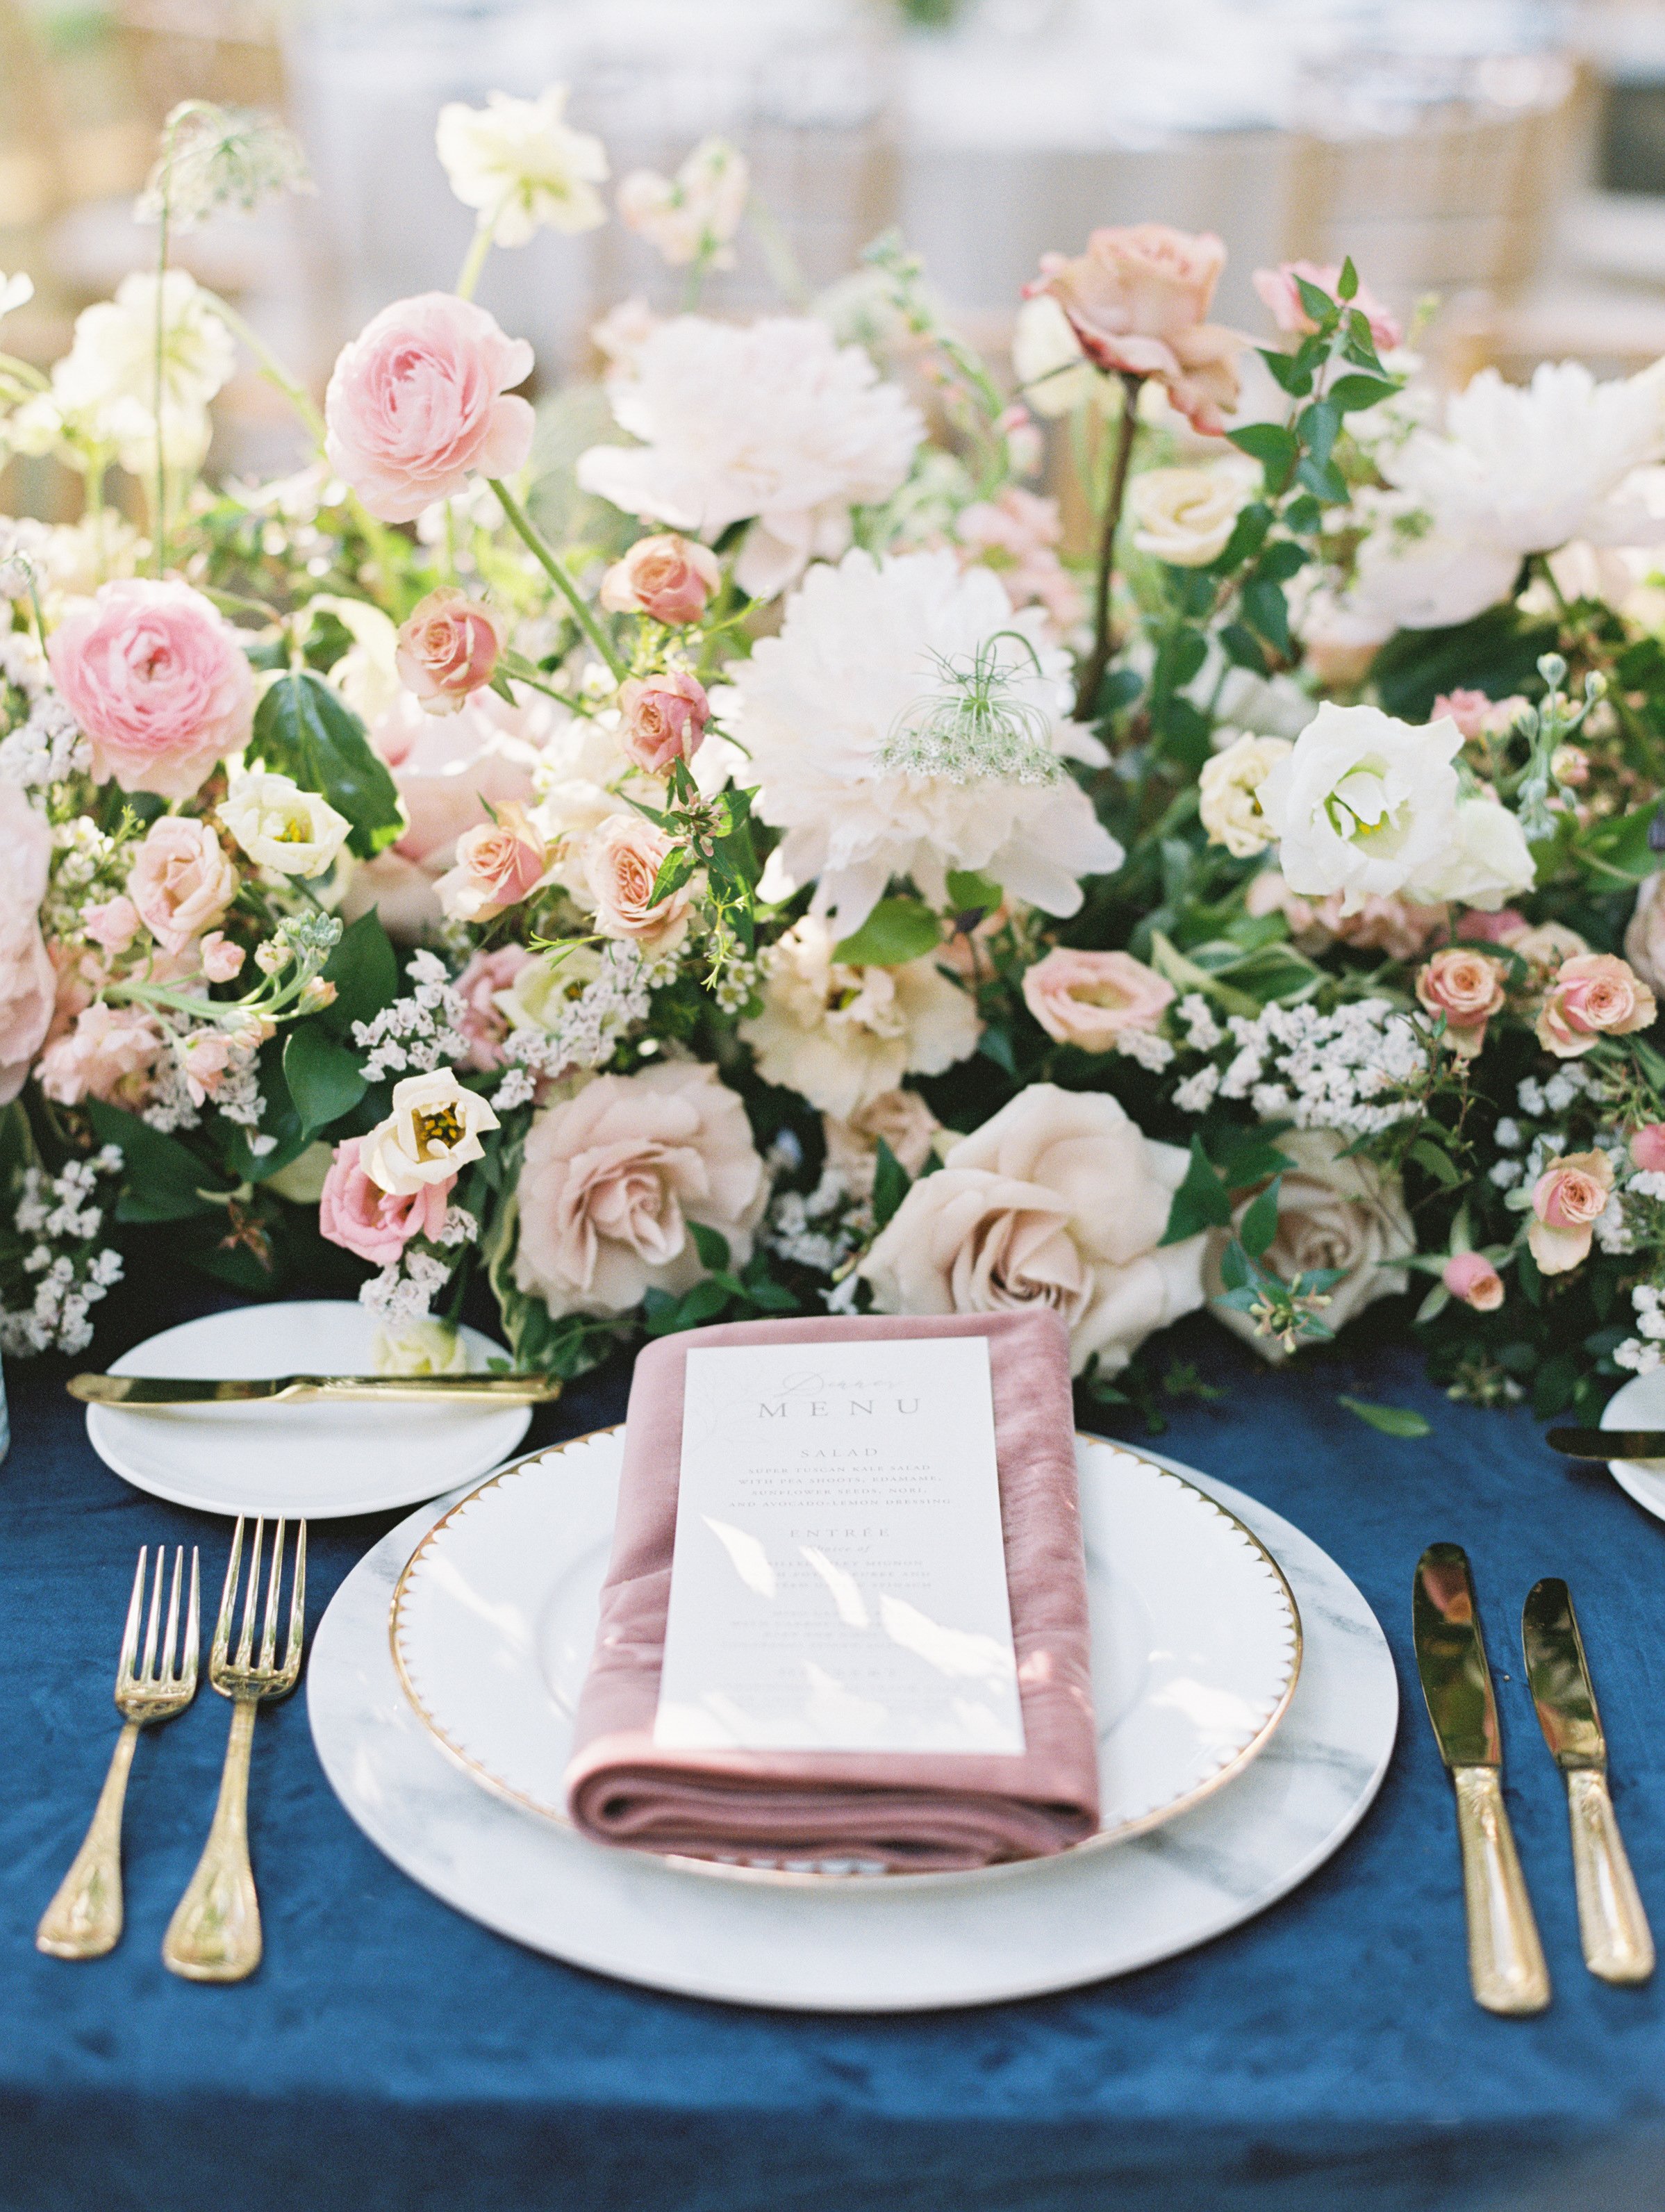 Pink-Champagne-Designs-Wedding-linens-and-color-themes-for-modern-weddings